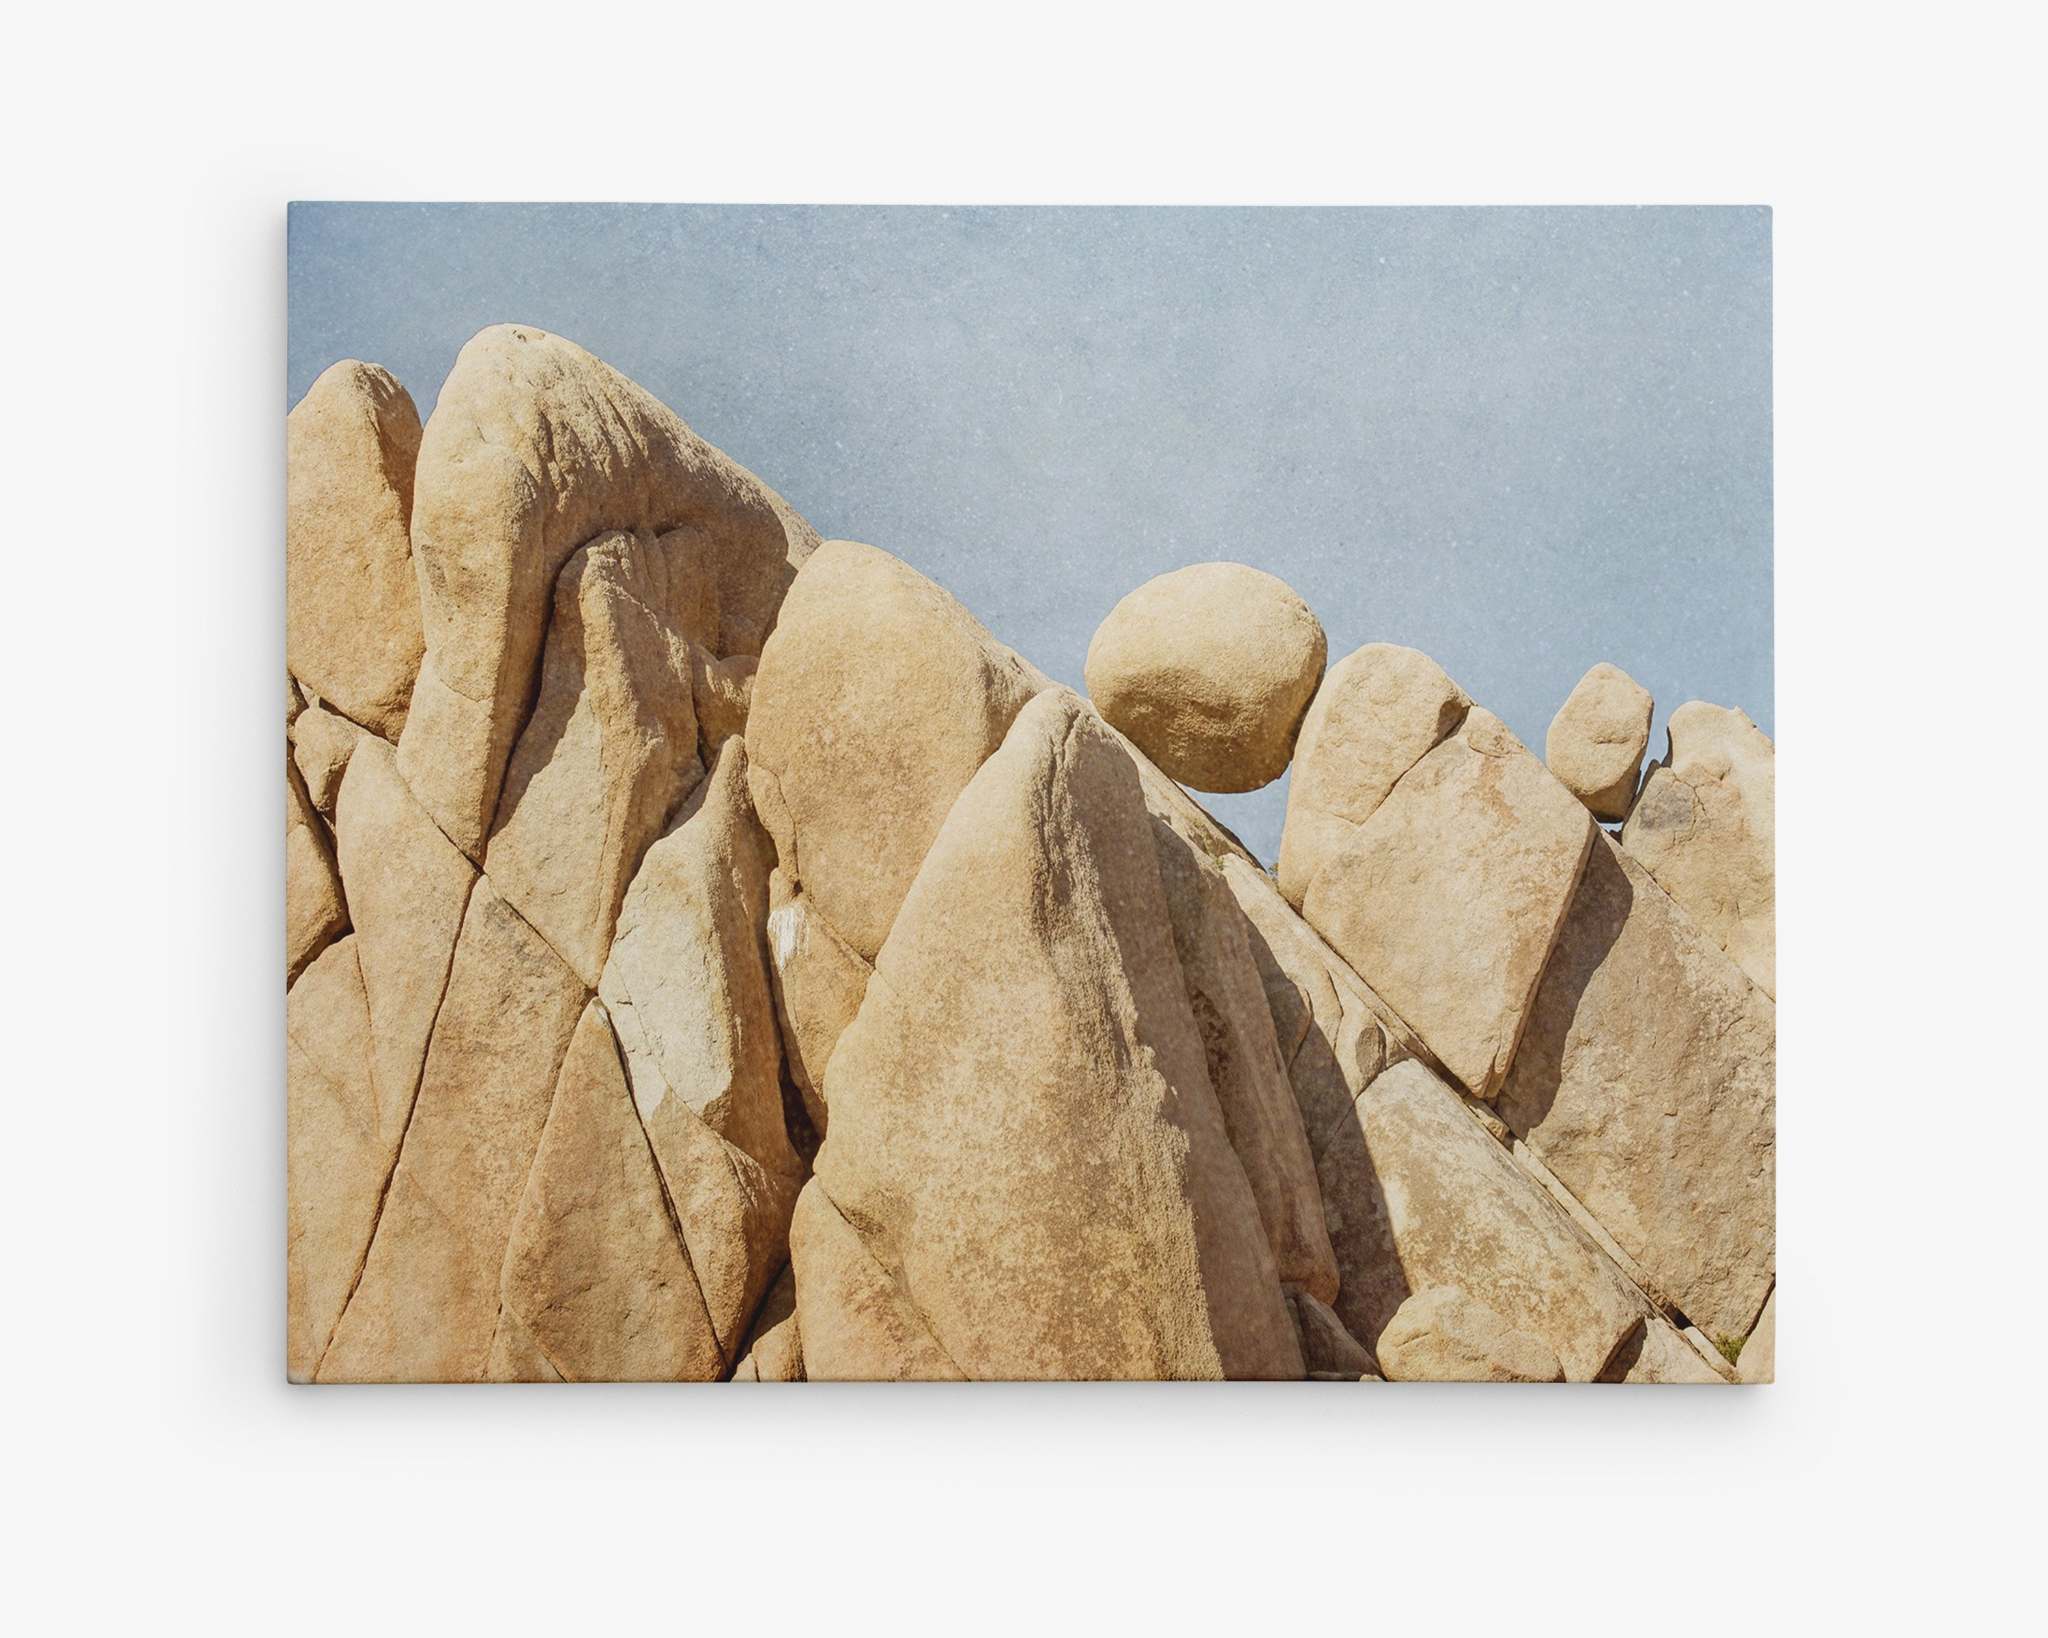 A collection of large, smooth, tan Joshua Tree desert rock formations against a clear blue sky. One round boulder appears to balance delicately atop a pointed rock, creating a captivating and precarious scene in a desert landscape—a perfect subject for Offley Green's Joshua Tree Canvas Wall Art, 'Rock Formations'.